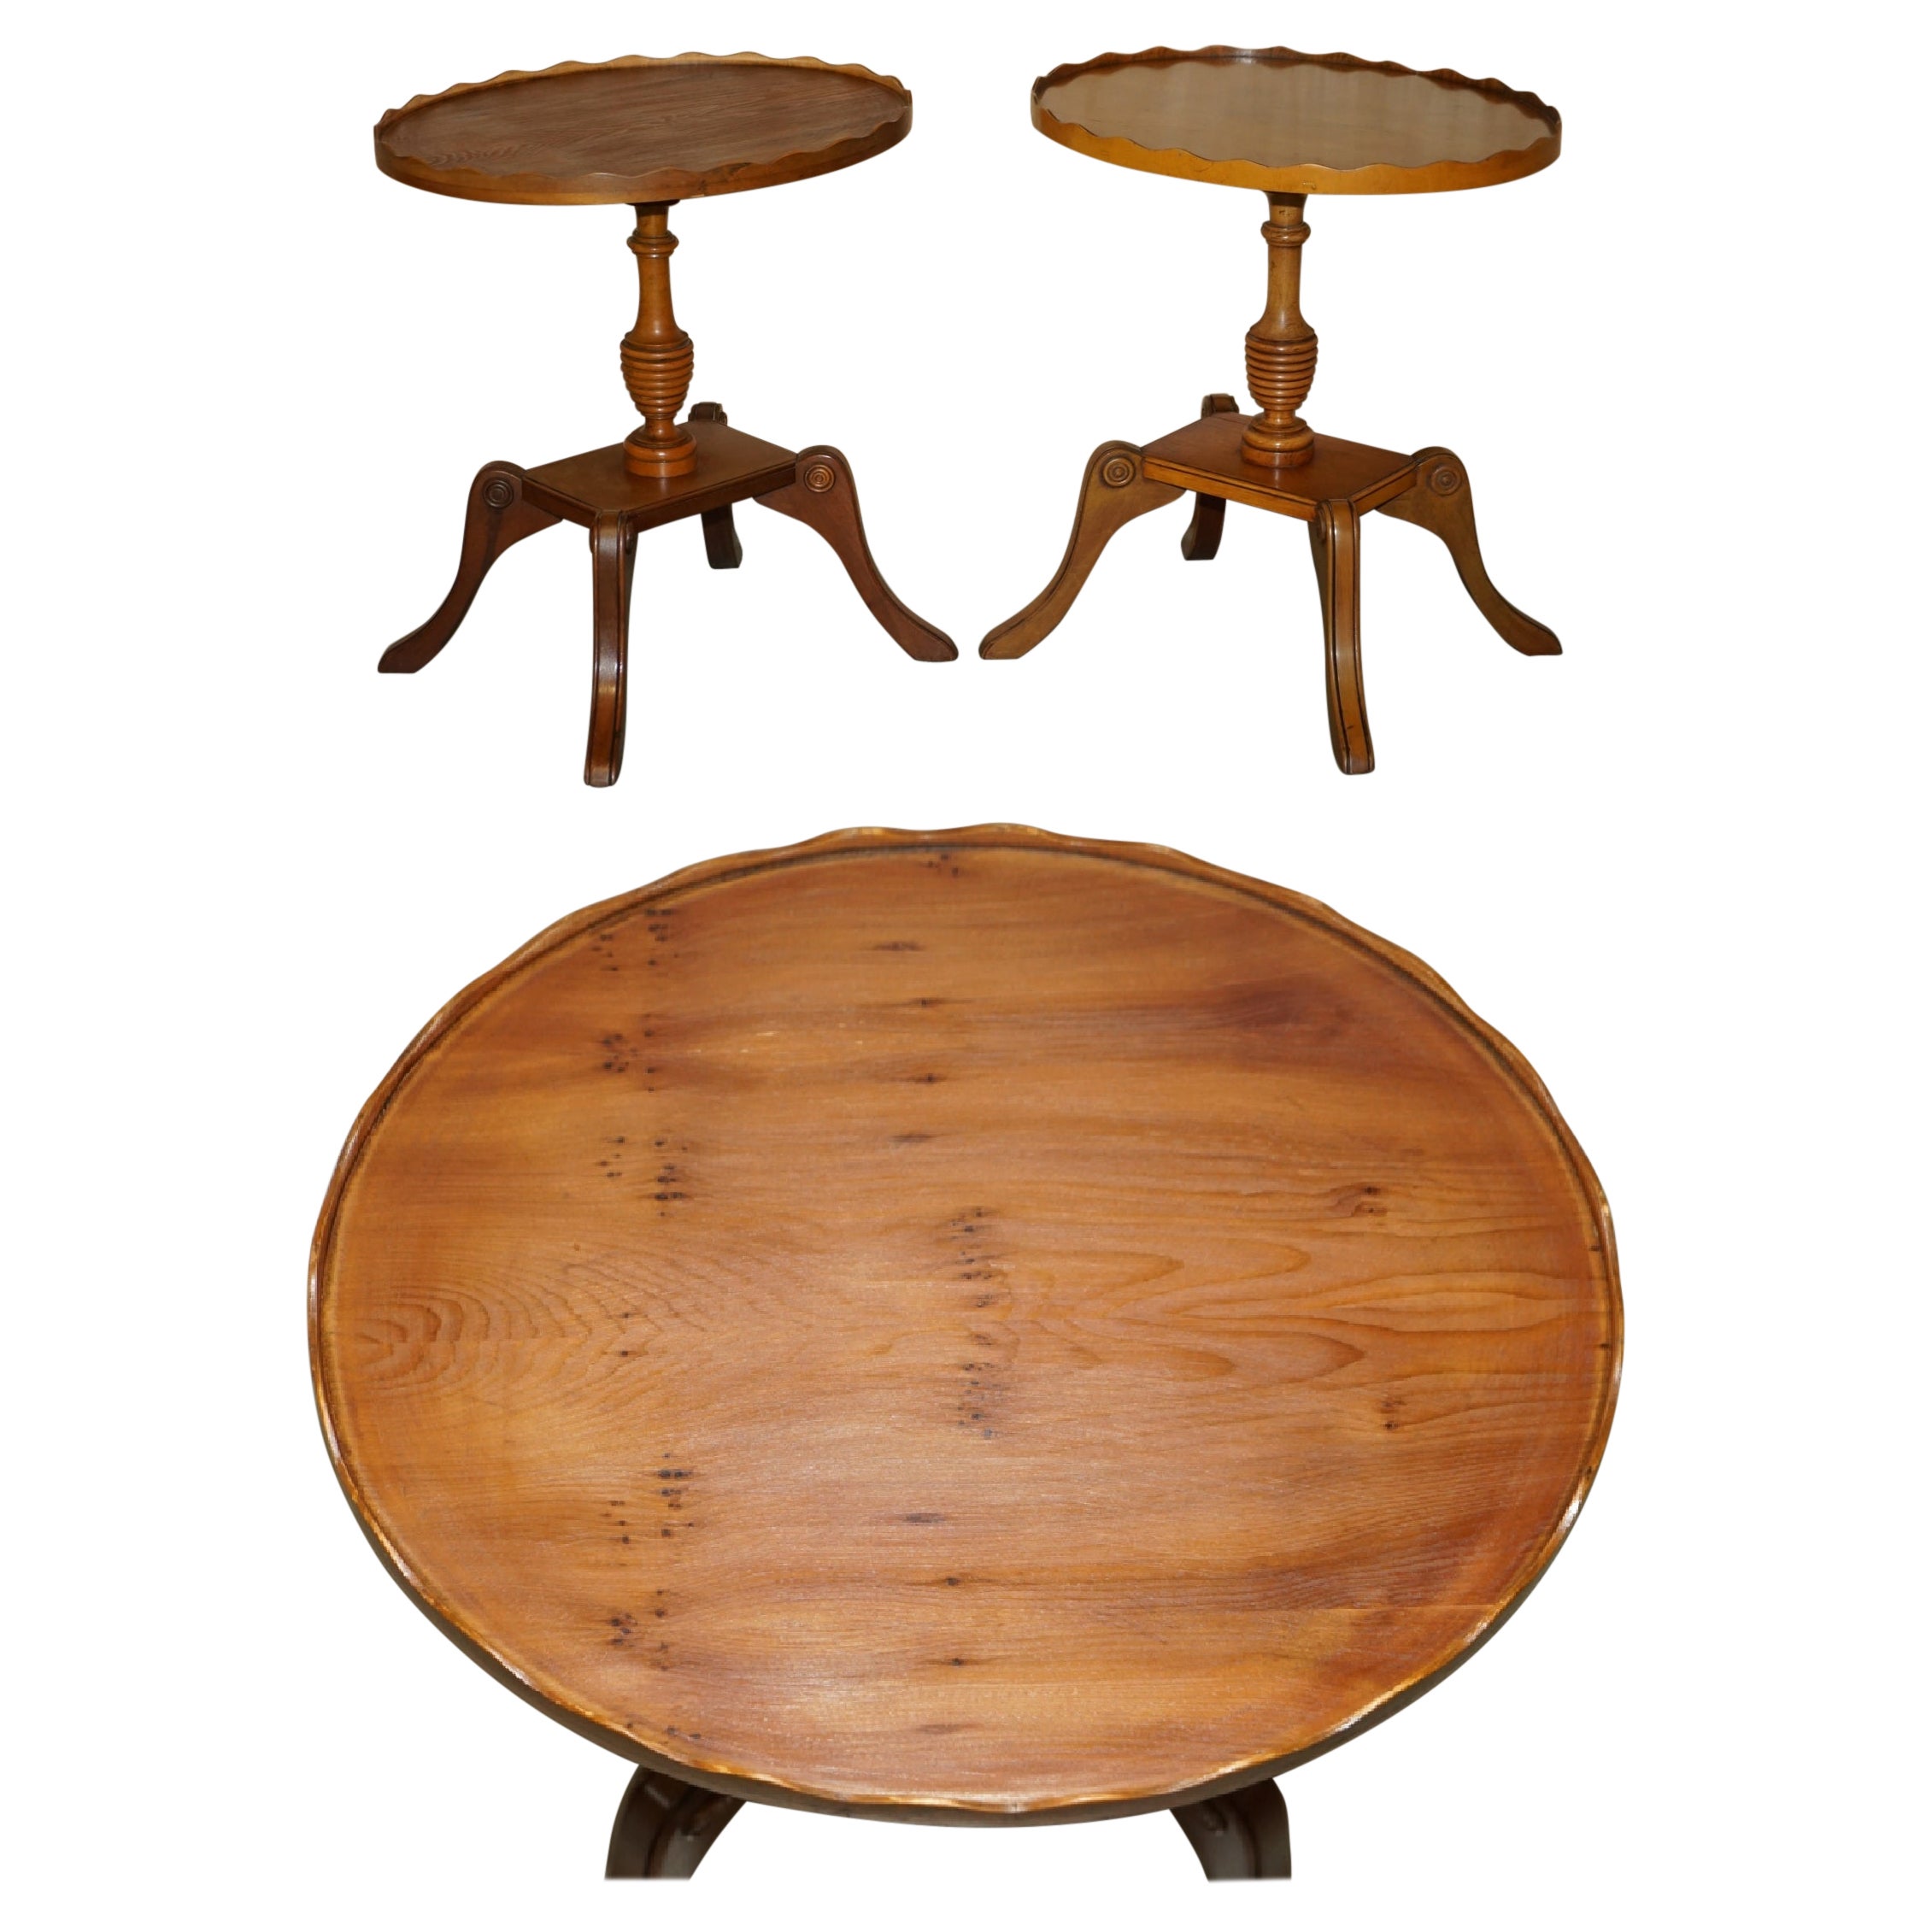 Pair of Burr Yew Wood Beresford & Hicks Side End Lamp Tables with Gallery Rail